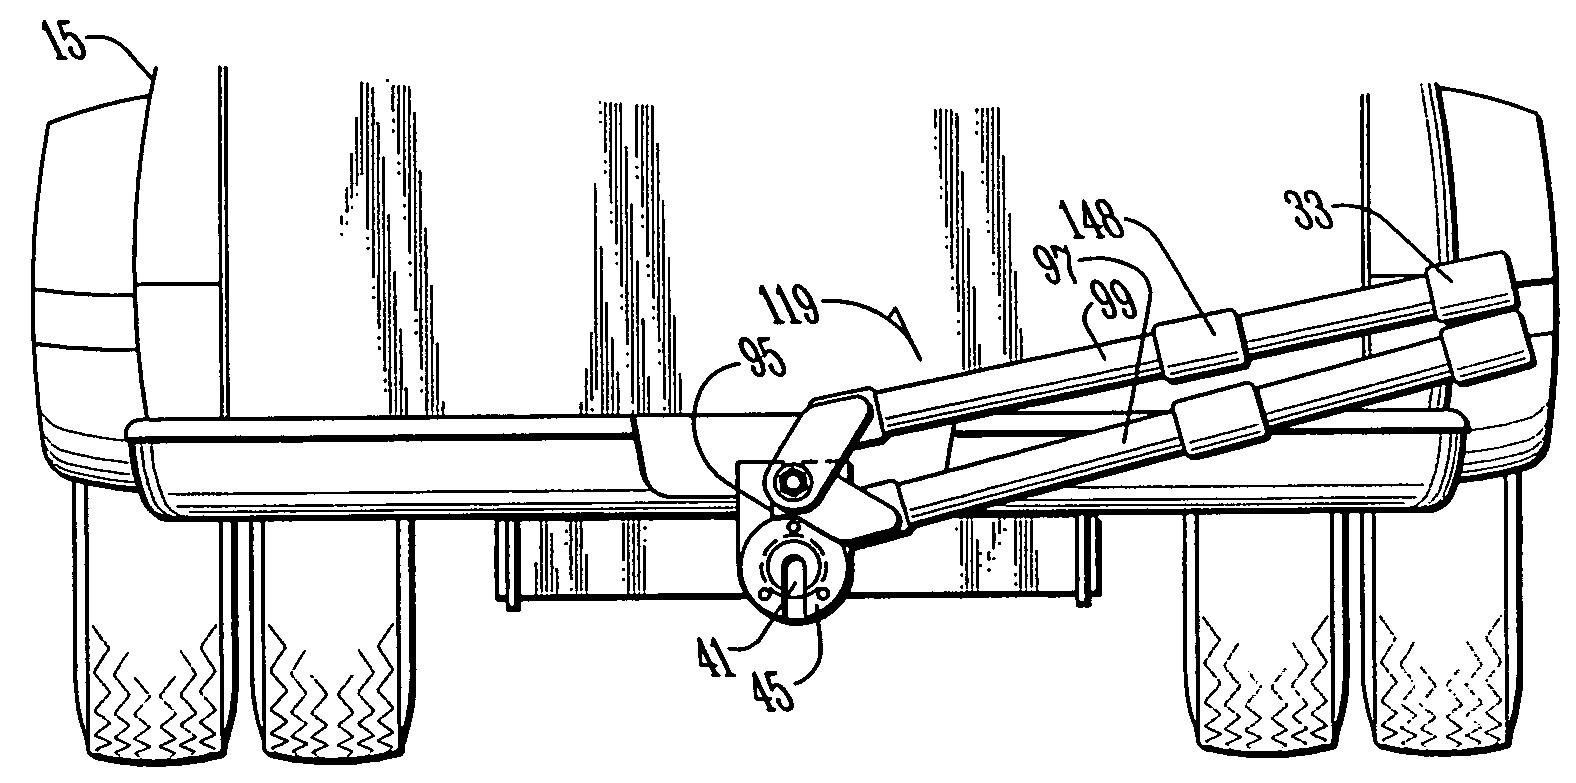 Tow bar having a single moving part for operatively accommodating pitch and roll movements between a towing vehicle and a towed vehicle